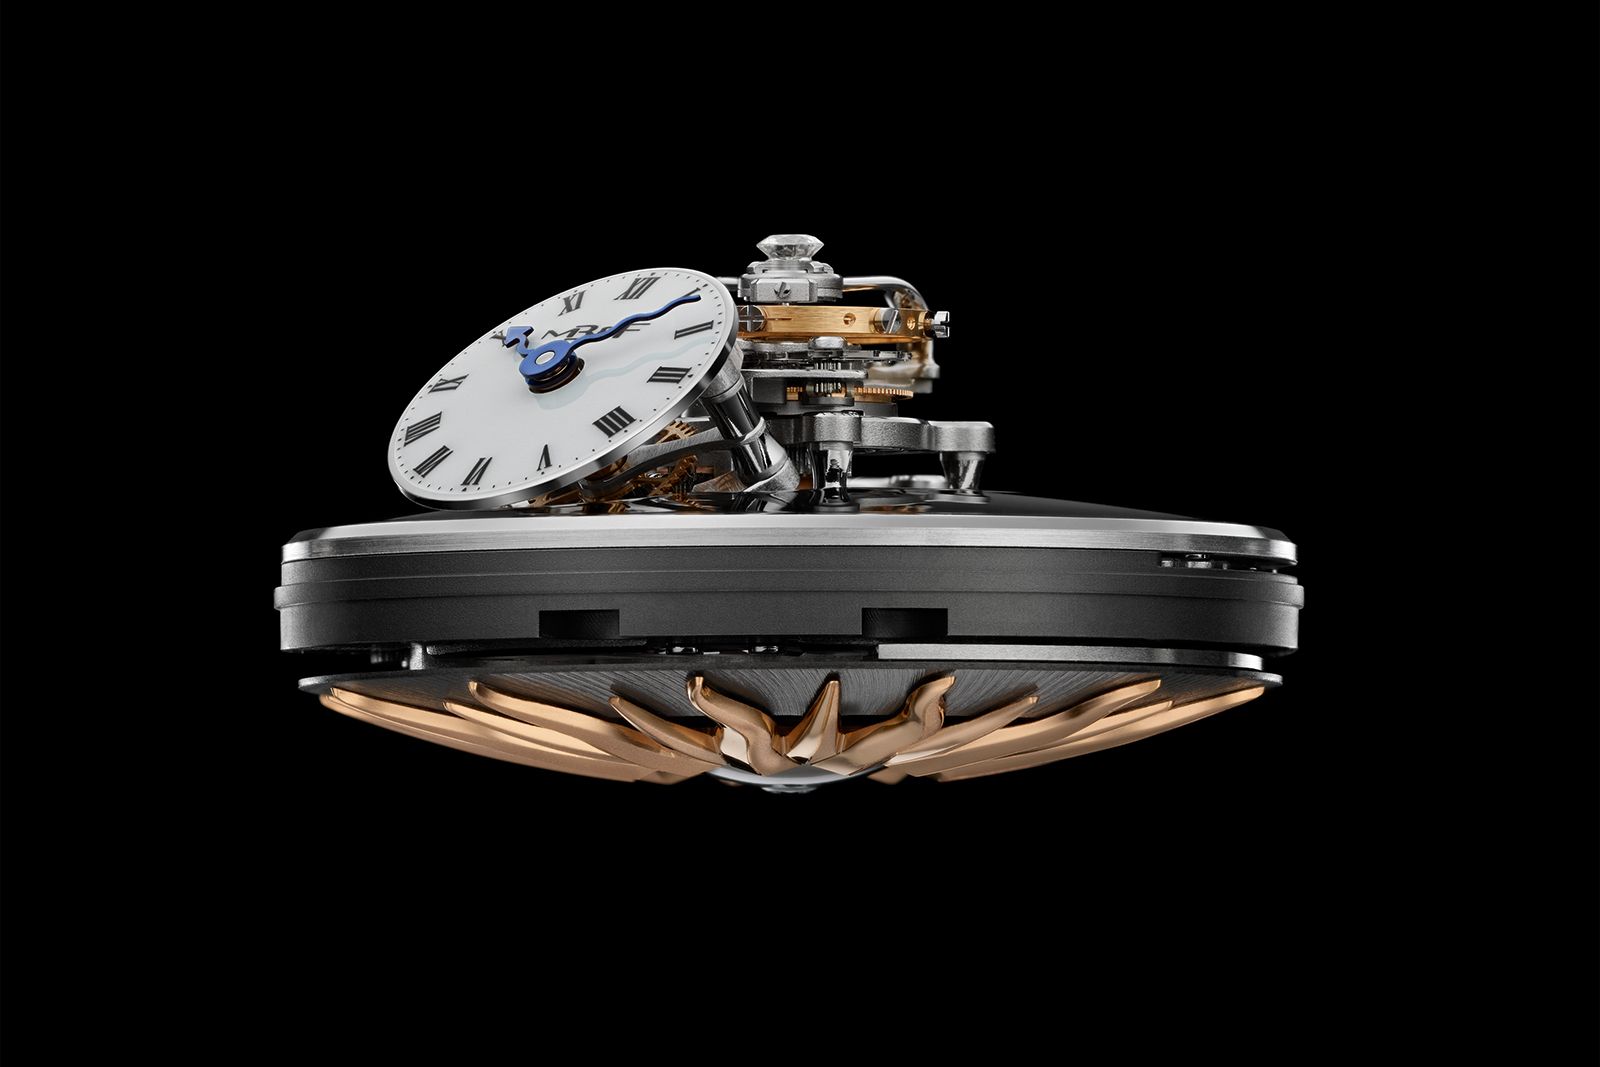 The MB&F x Bulgari LM Flying T Allegra watch is described as “radical in terms of its architecture and construction,” featuring an hours and minutes dial set at a 50-degree angle